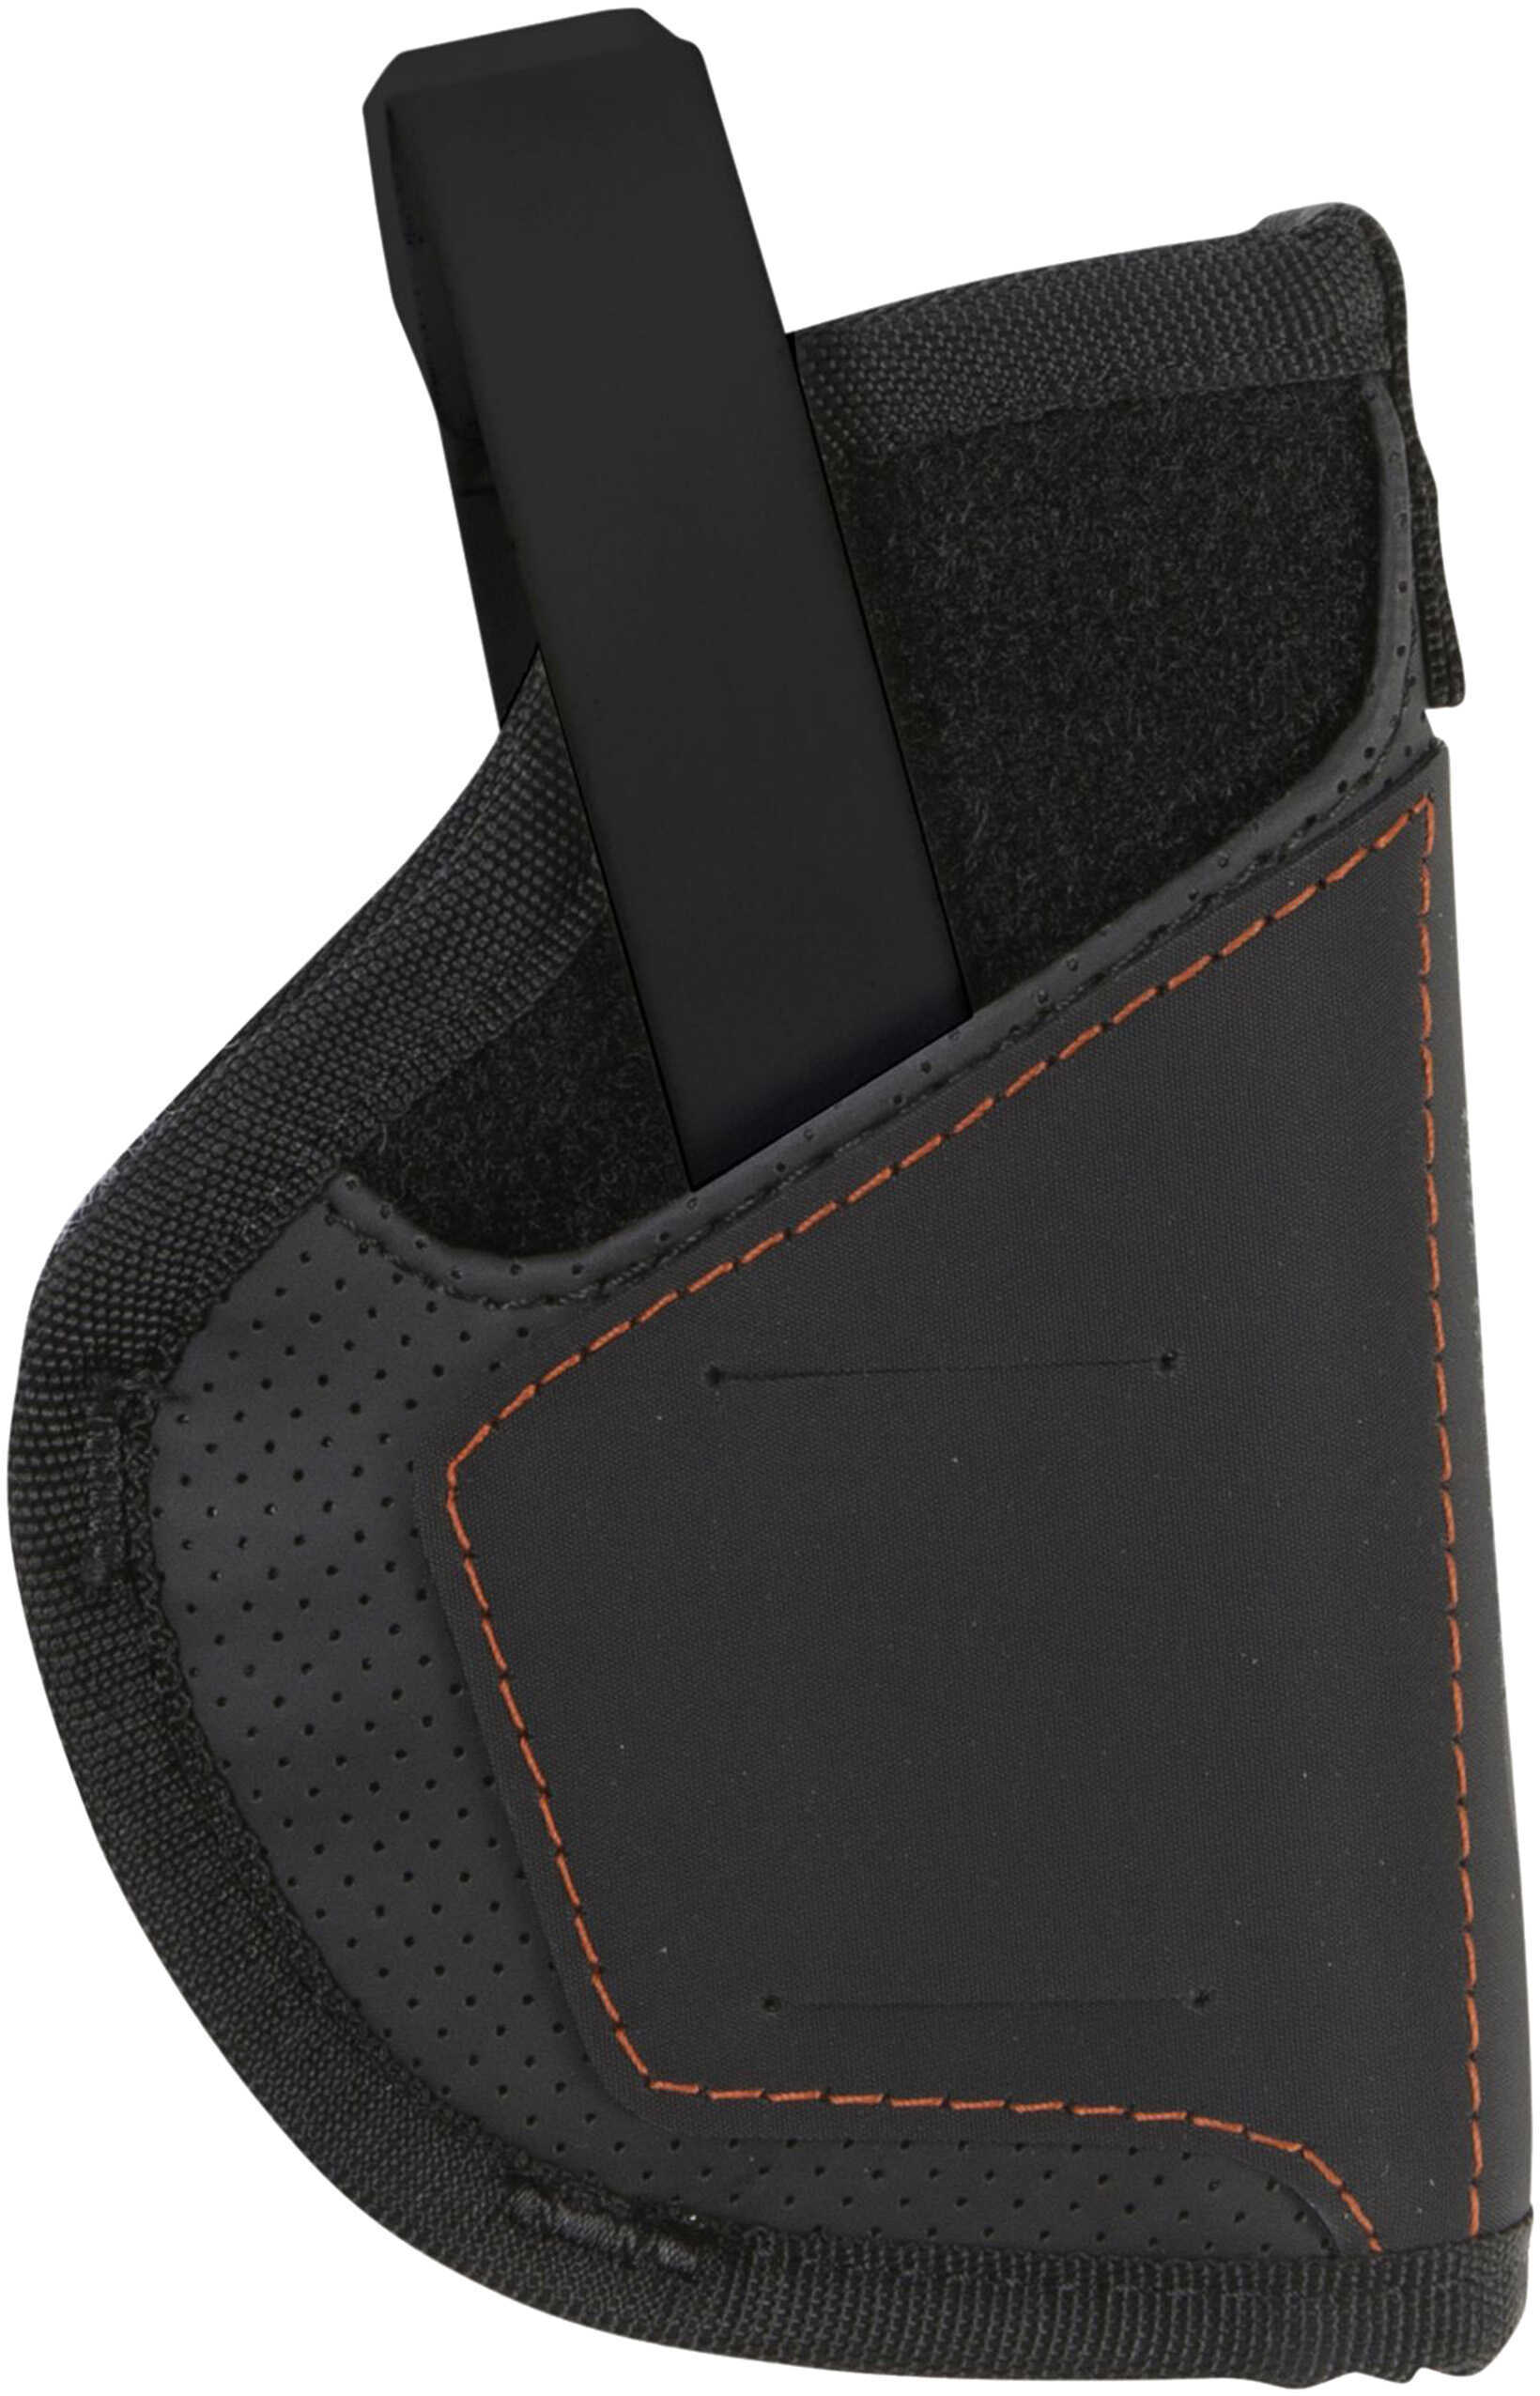 Allen Cases Swipe Switch Holster Most 3 1/4 to 3 3/4" Barrel Compact Semi-Automatic, Ambidextrous, Black